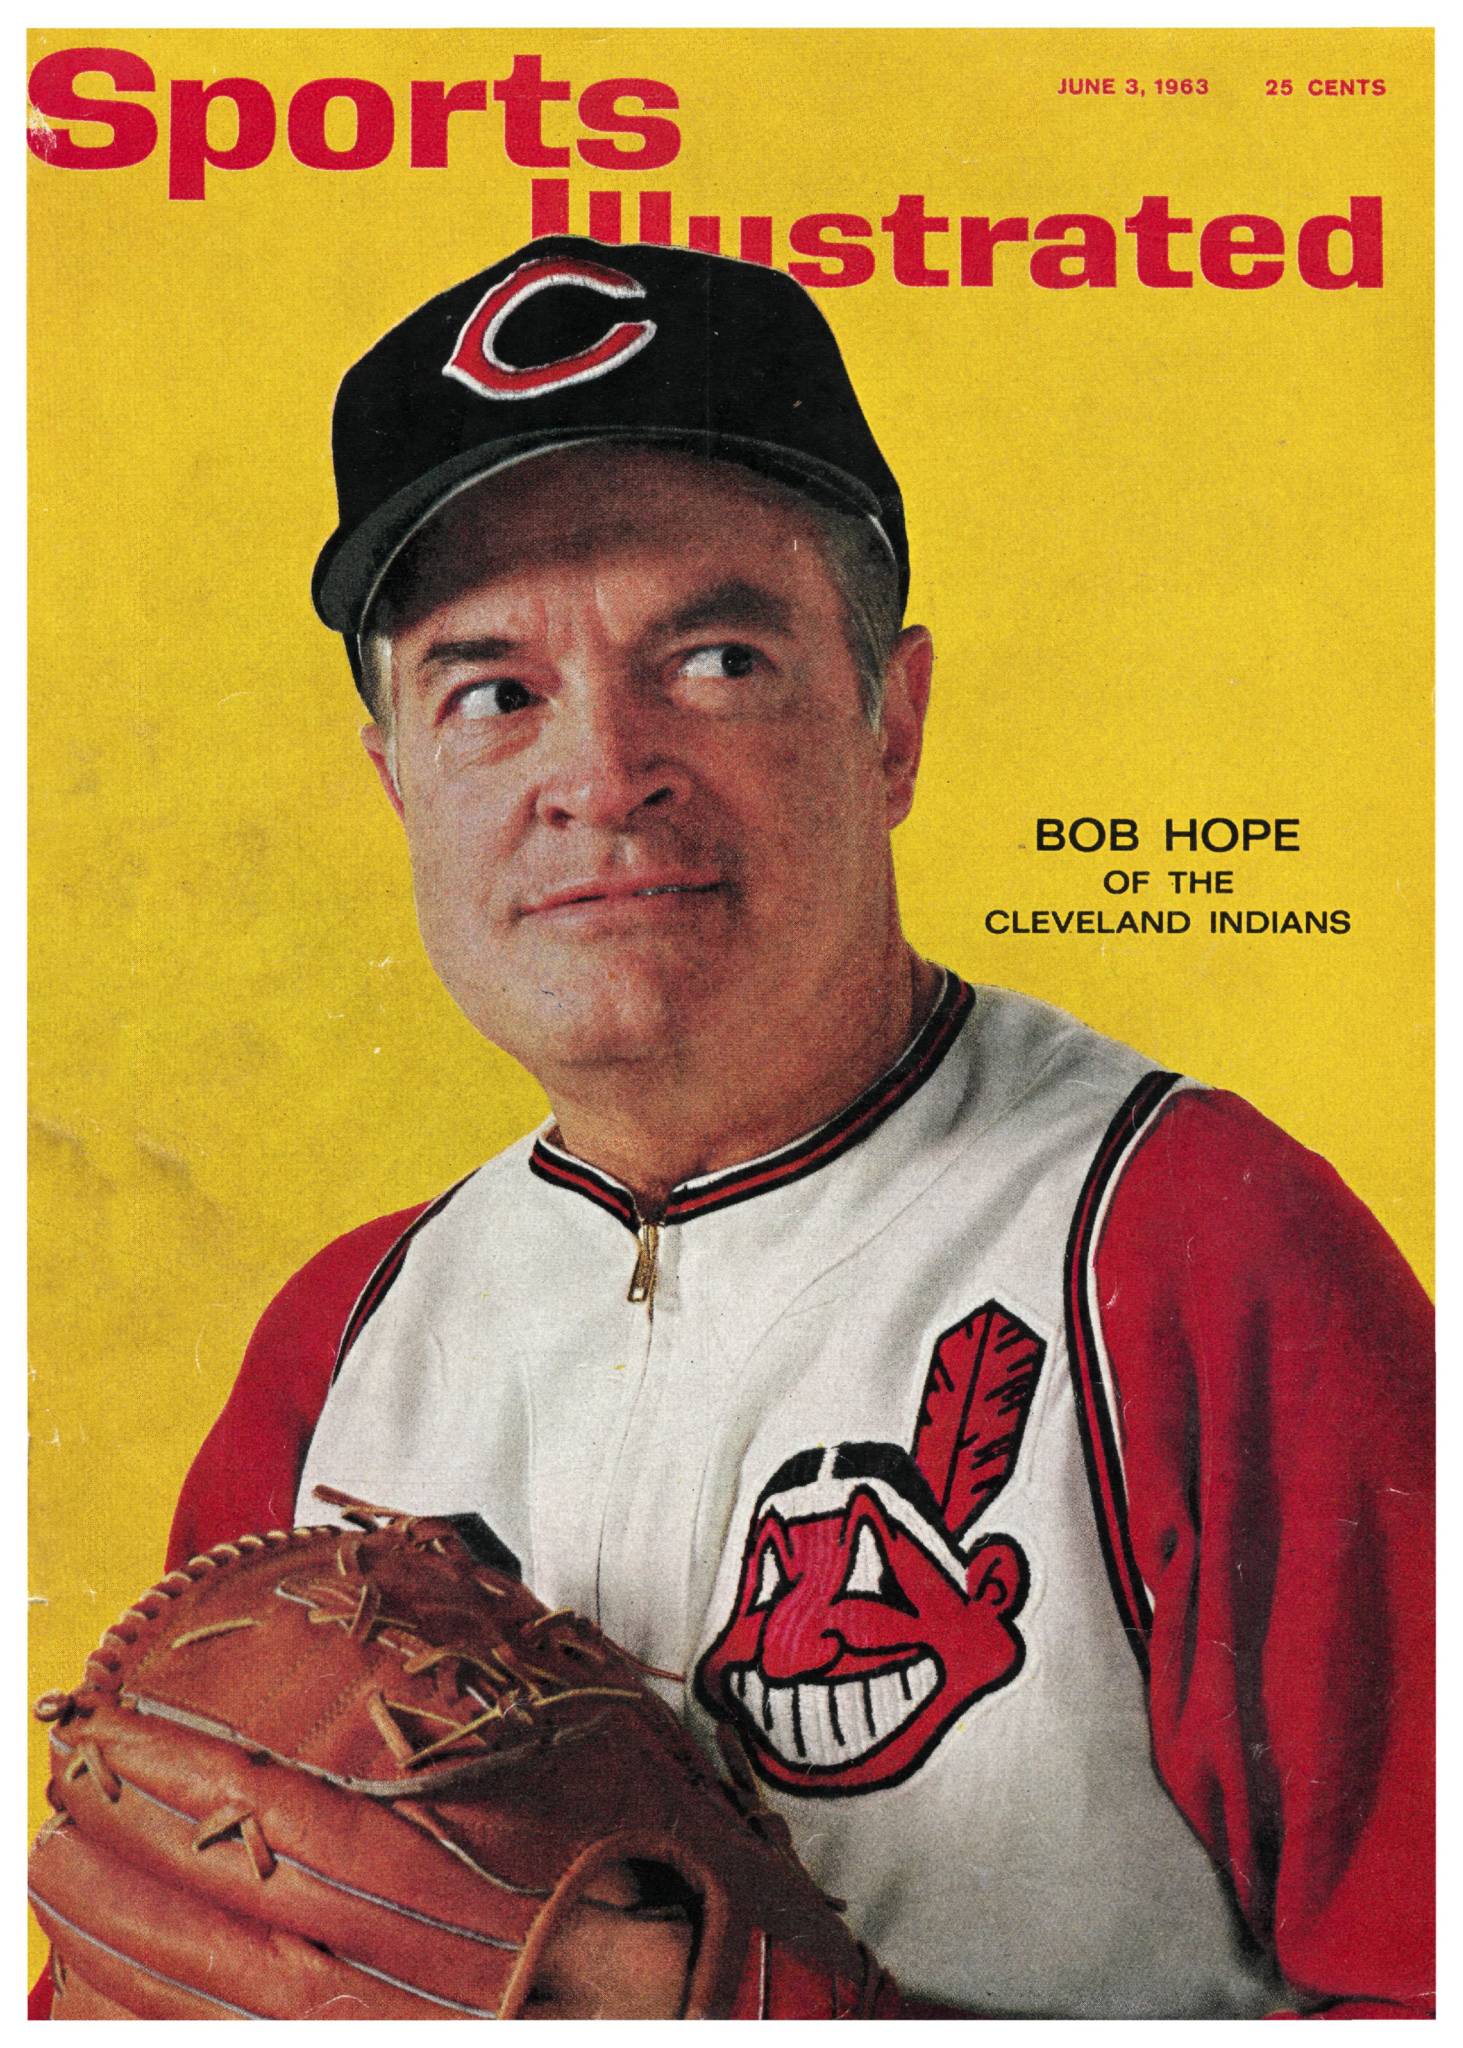 Baseball by BSmile on X: Bob Hope & Bing Crosby put on their baseball  uniforms! Bob was part-owner of the Cleveland #Indians, Bing was part-owner  of the Pittsburgh #Pirates (February 14, 1947) #